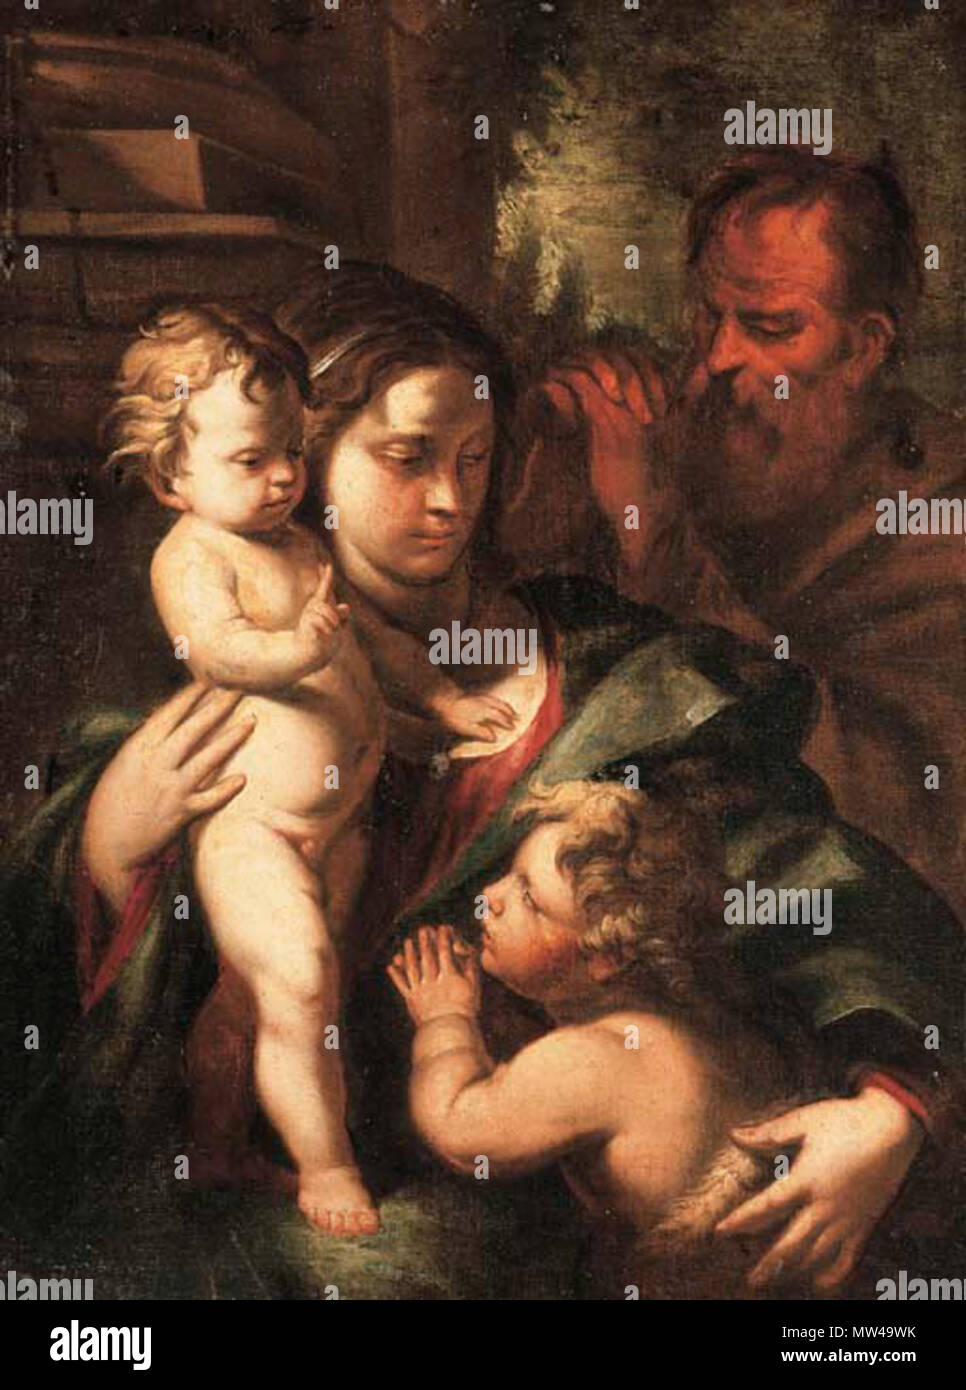 . The Holy Family with John the Baptist . before 1717.    Nicola Vaccaro  (1640–1709)    Description Italian painter  Date of birth/death 1632 23 May 1709 / 24 May 1709  Location of birth/death Naples Naples  Work location Rome  Authority control  : Q7029132 VIAF: 72619335 ISNI: 0000 0000 8055 5540 ULAN: 500018174 GND: 135767911 RKD: 78906 624 Vaccaro-nicola-1637-1717-italy-die-heilige-familie-mit-dem-jo Stock Photo